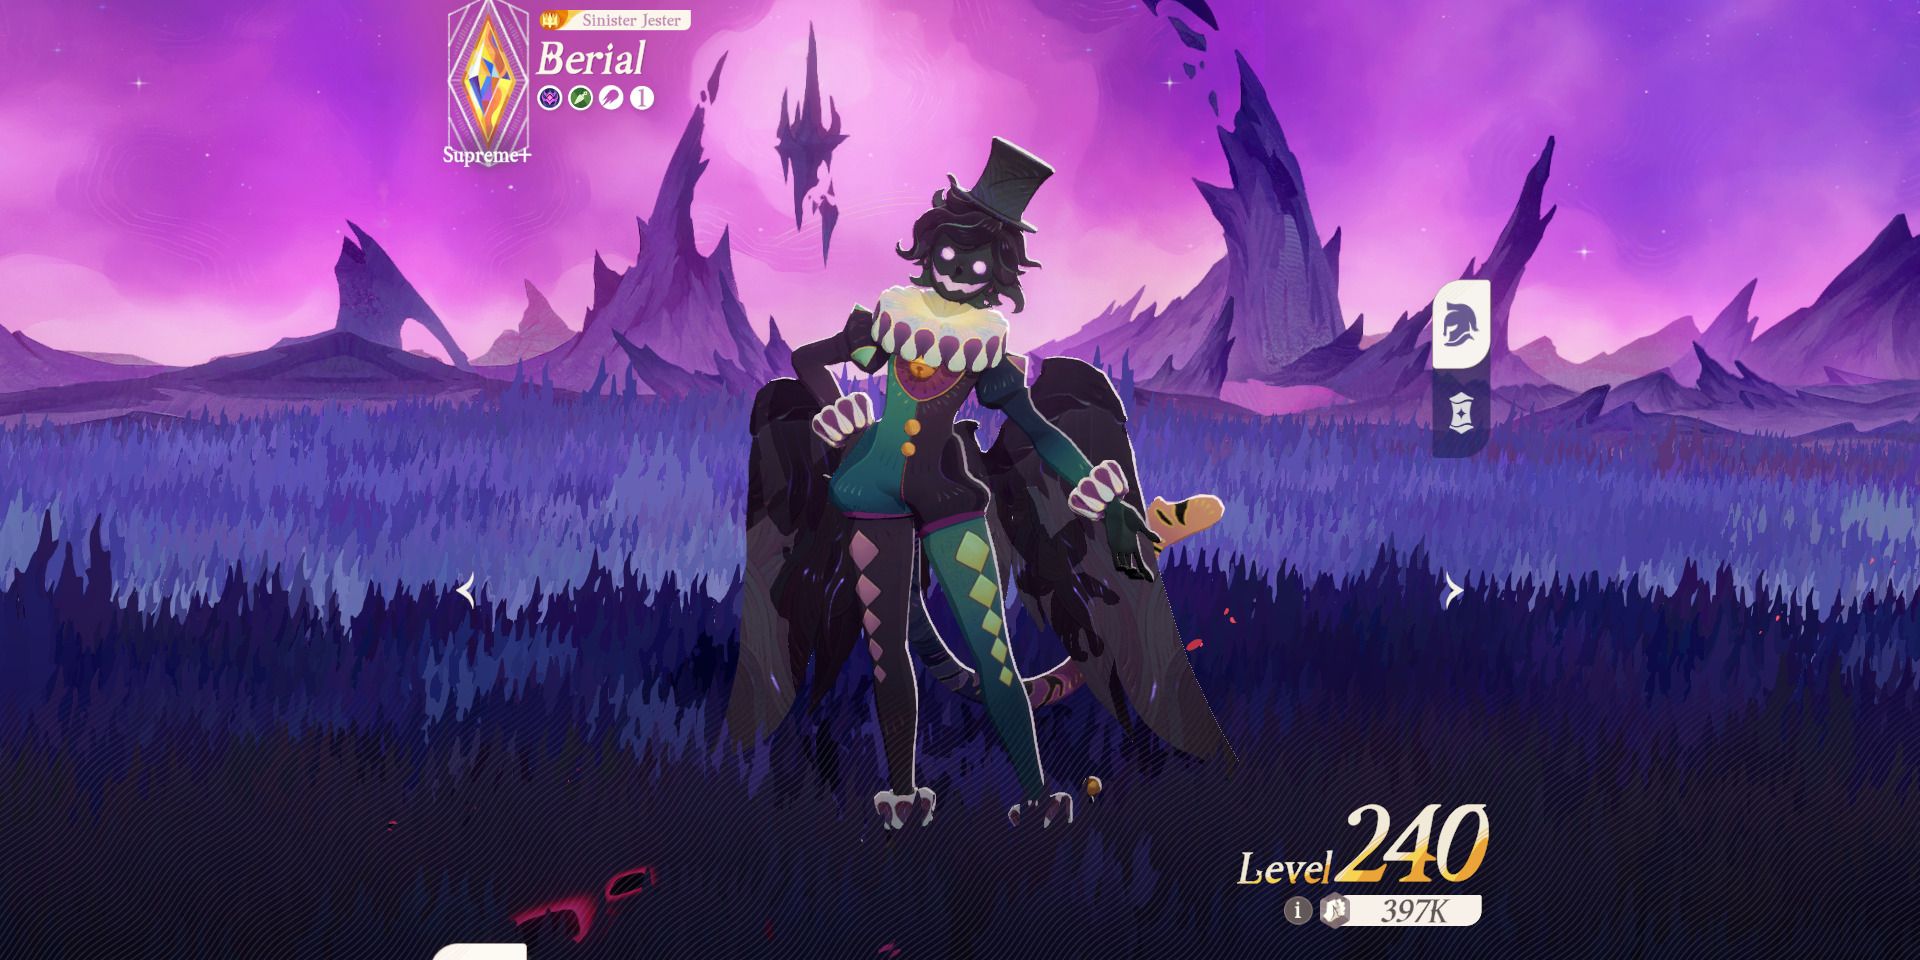 Image of the Rogue character Berial in AFK Journey